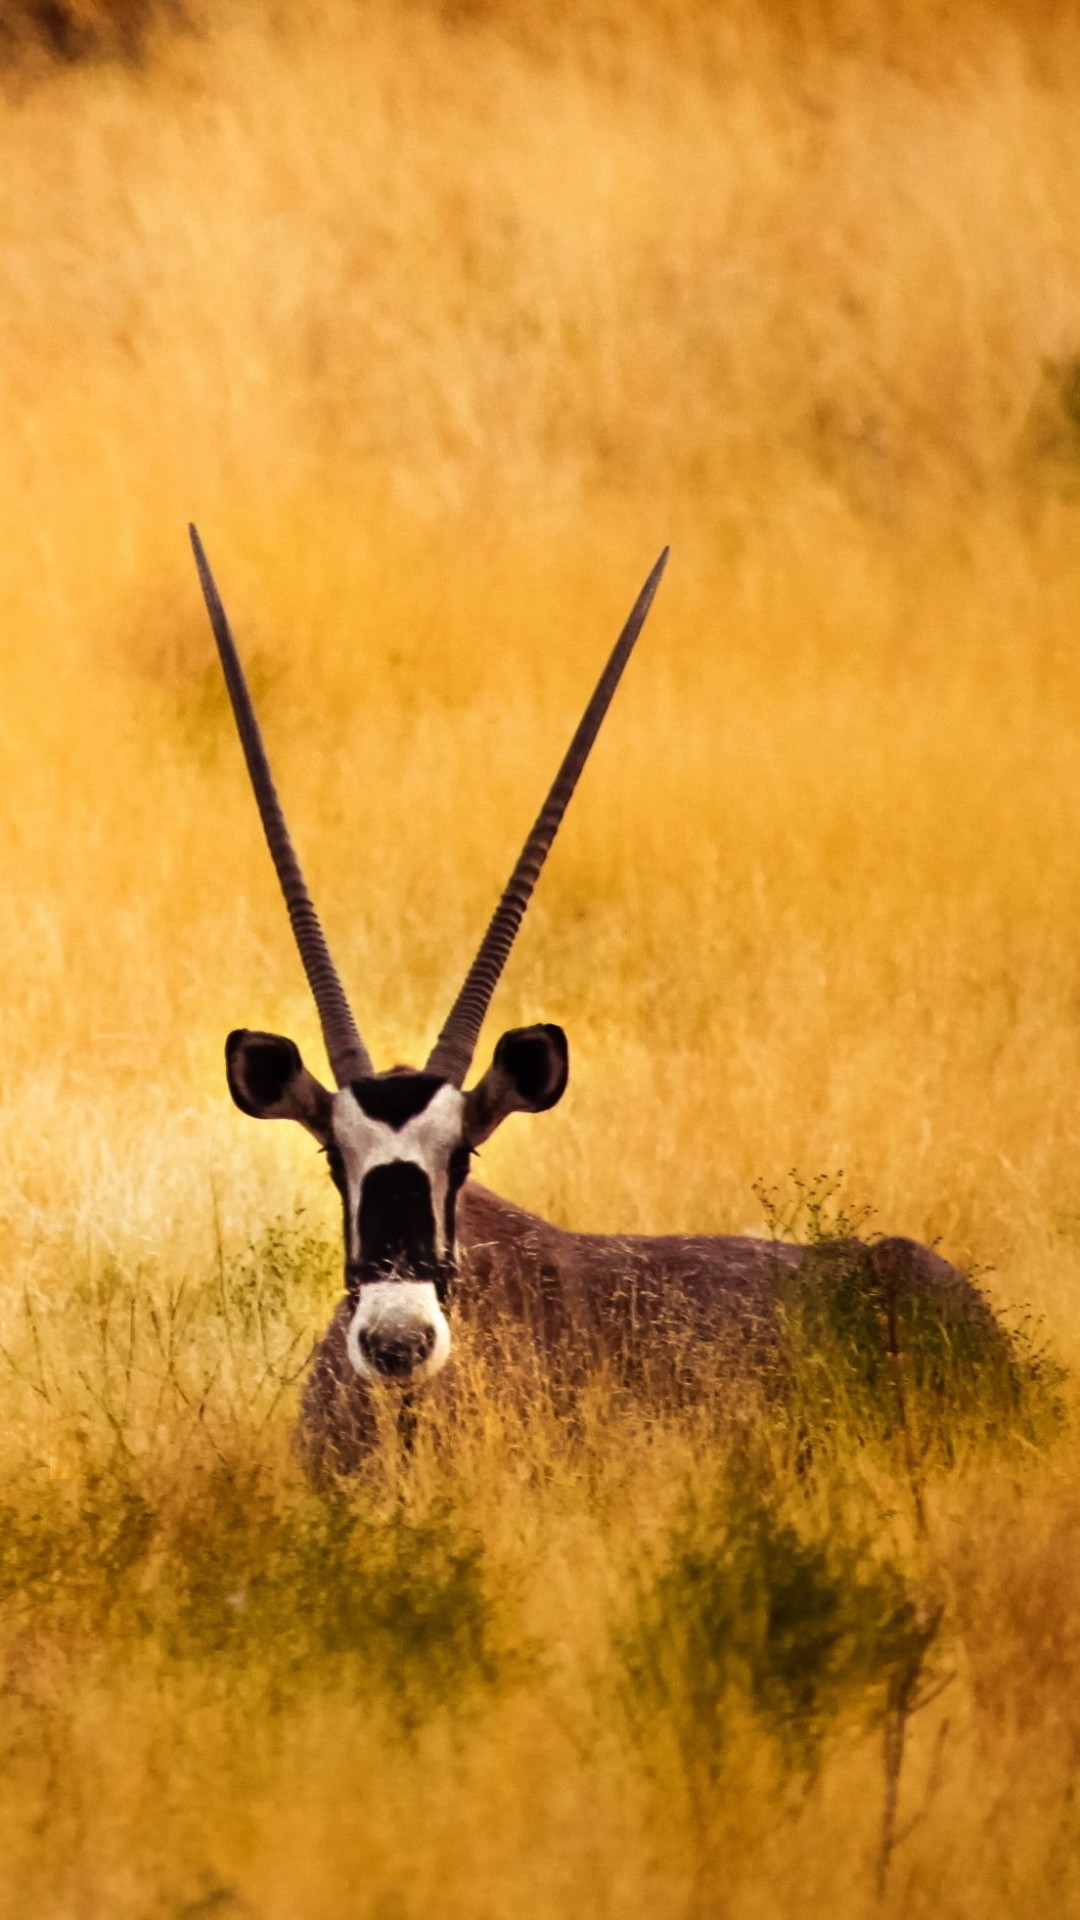 Antelope In The Savanna Wallpaper for SAMSUNG Galaxy S5